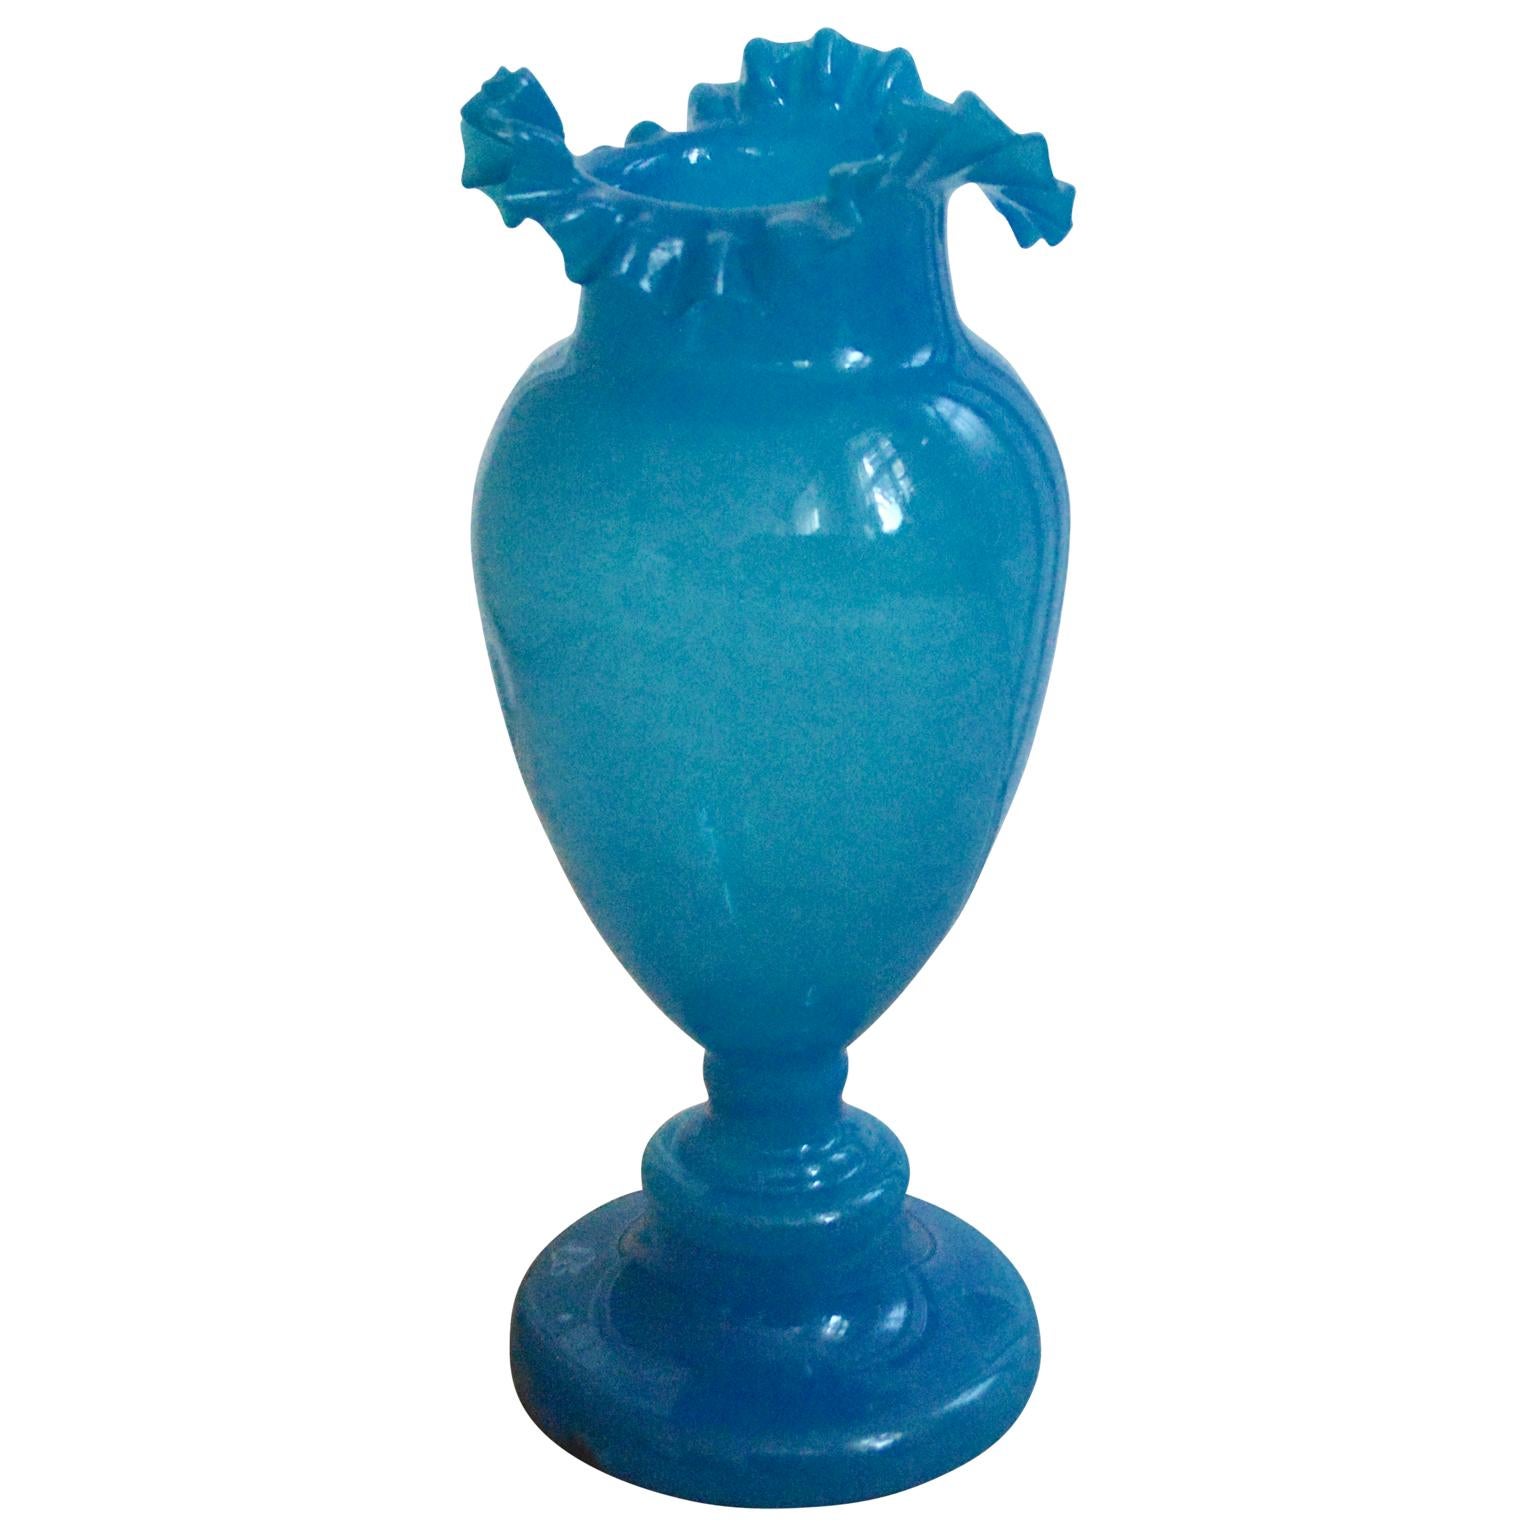 Large blue opaline glass egg vase with a scaly or ribbed collar. The vase is proberbly Italian and from the Art Nouveau periode.